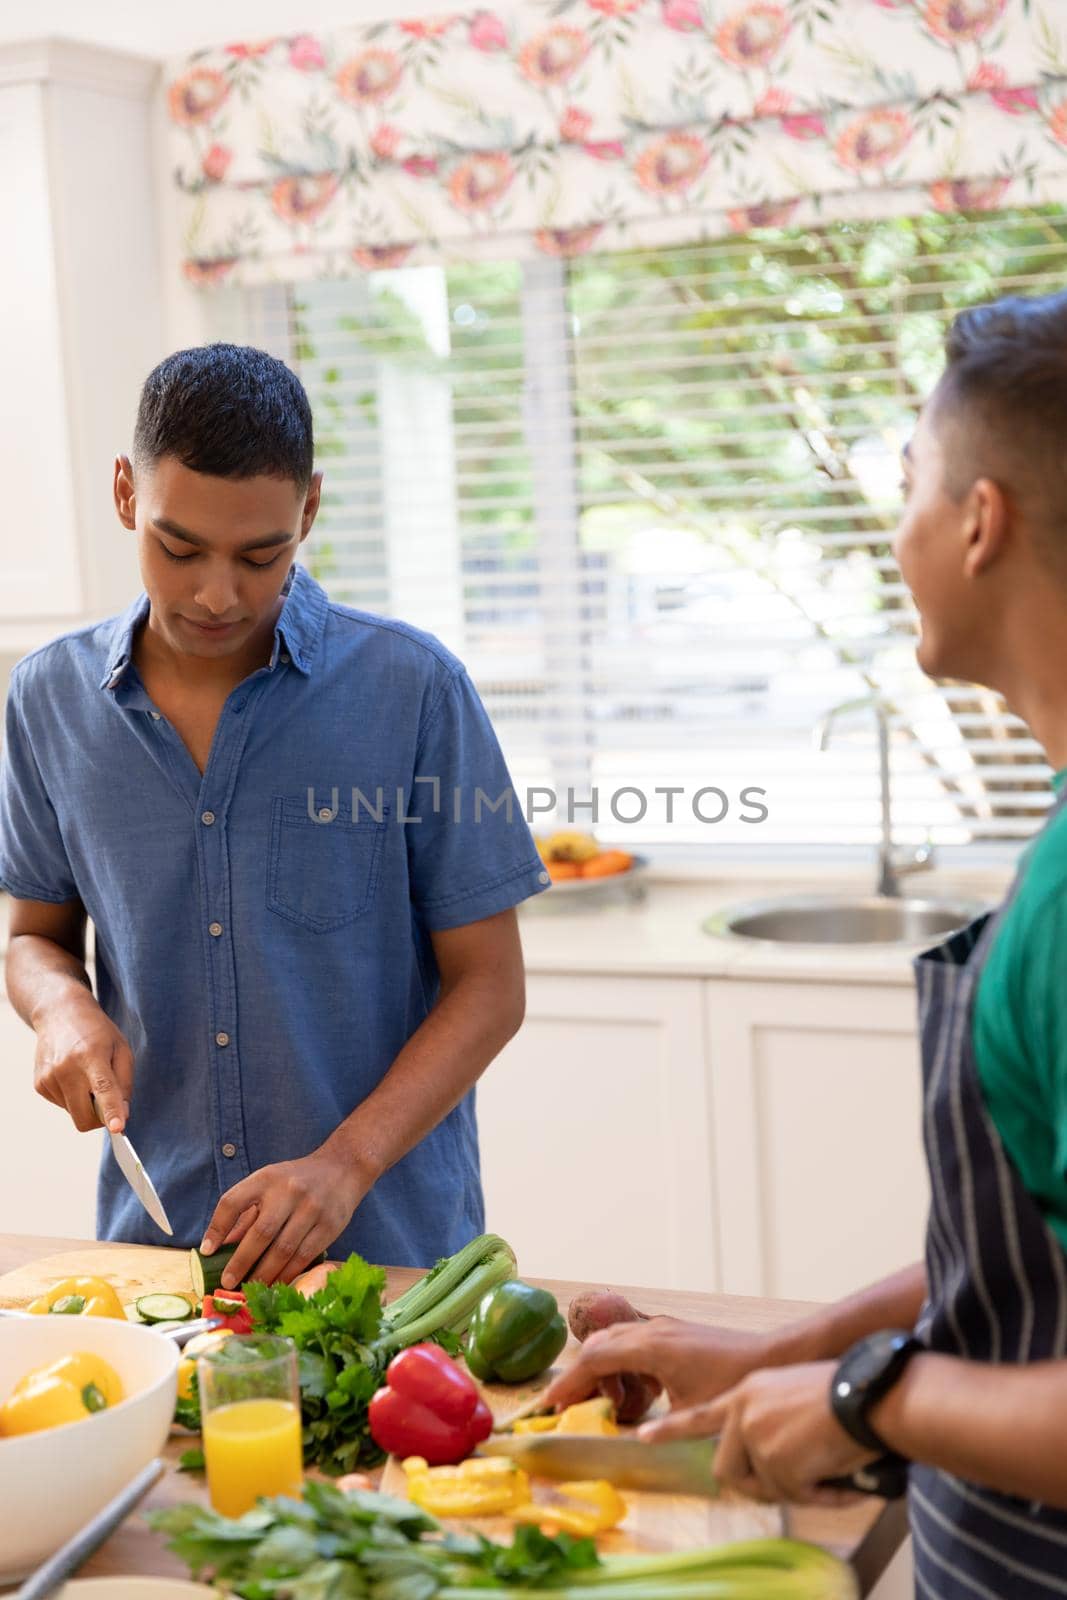 Diverse gay male couple spending time in kitchen cooking together. staying at home in isolation during quarantine lockdown.